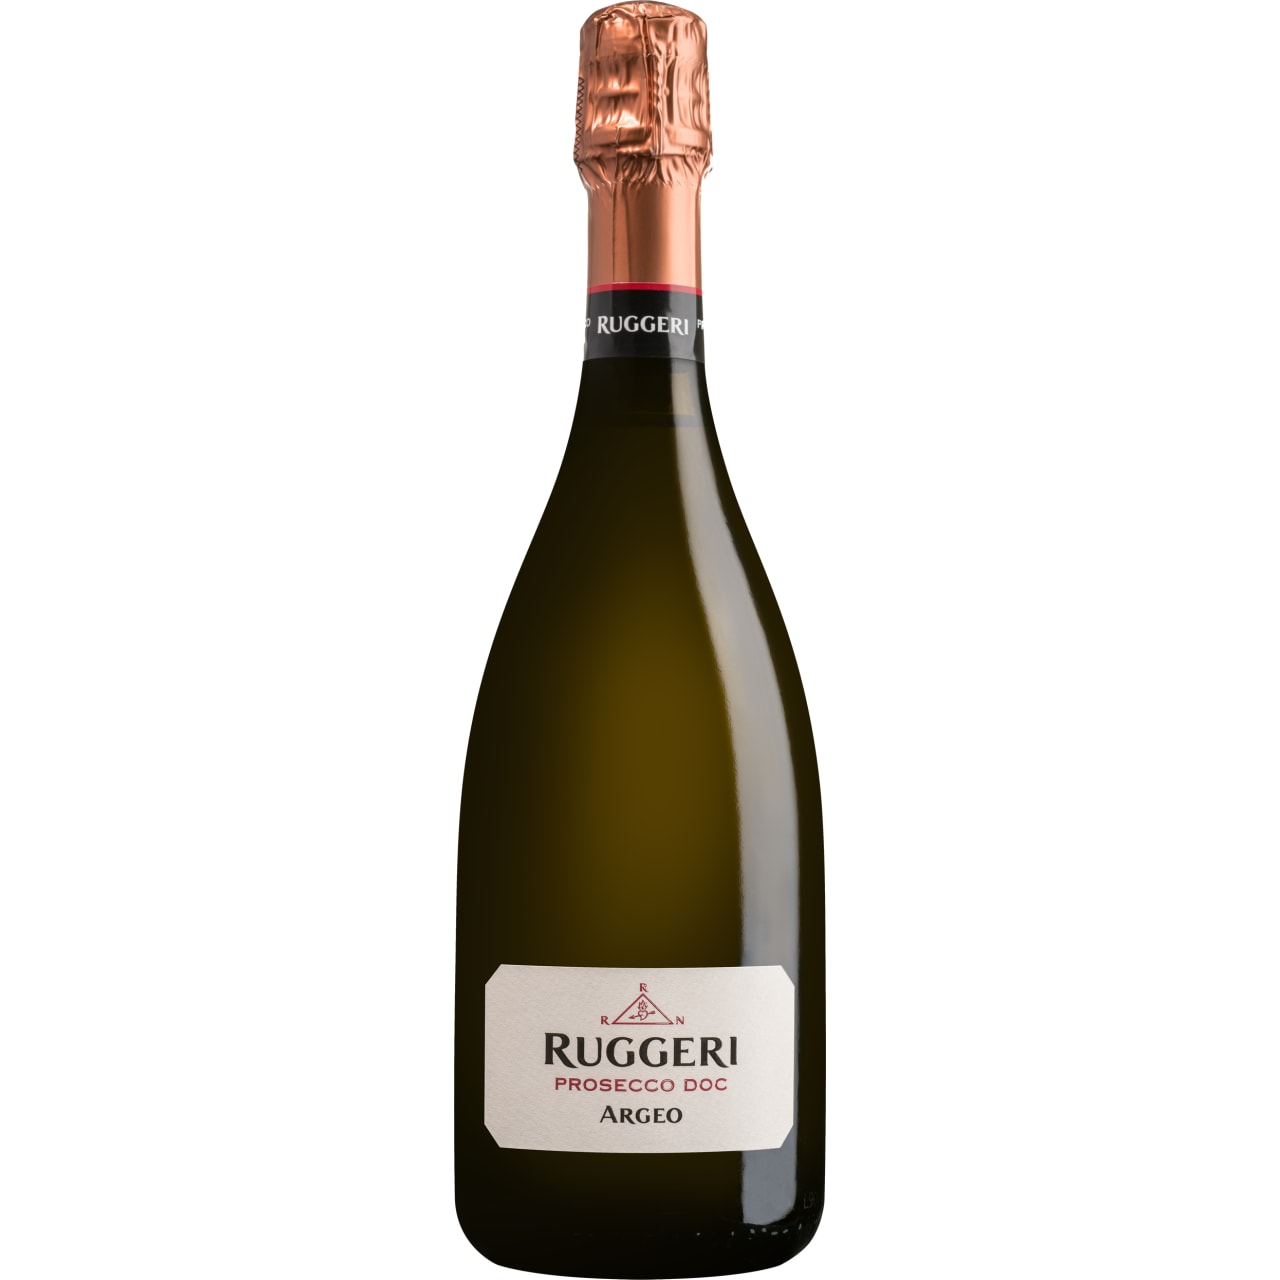 Classic, elegant Prosecco with citrus, stone fruit and floral aromas and flavours.